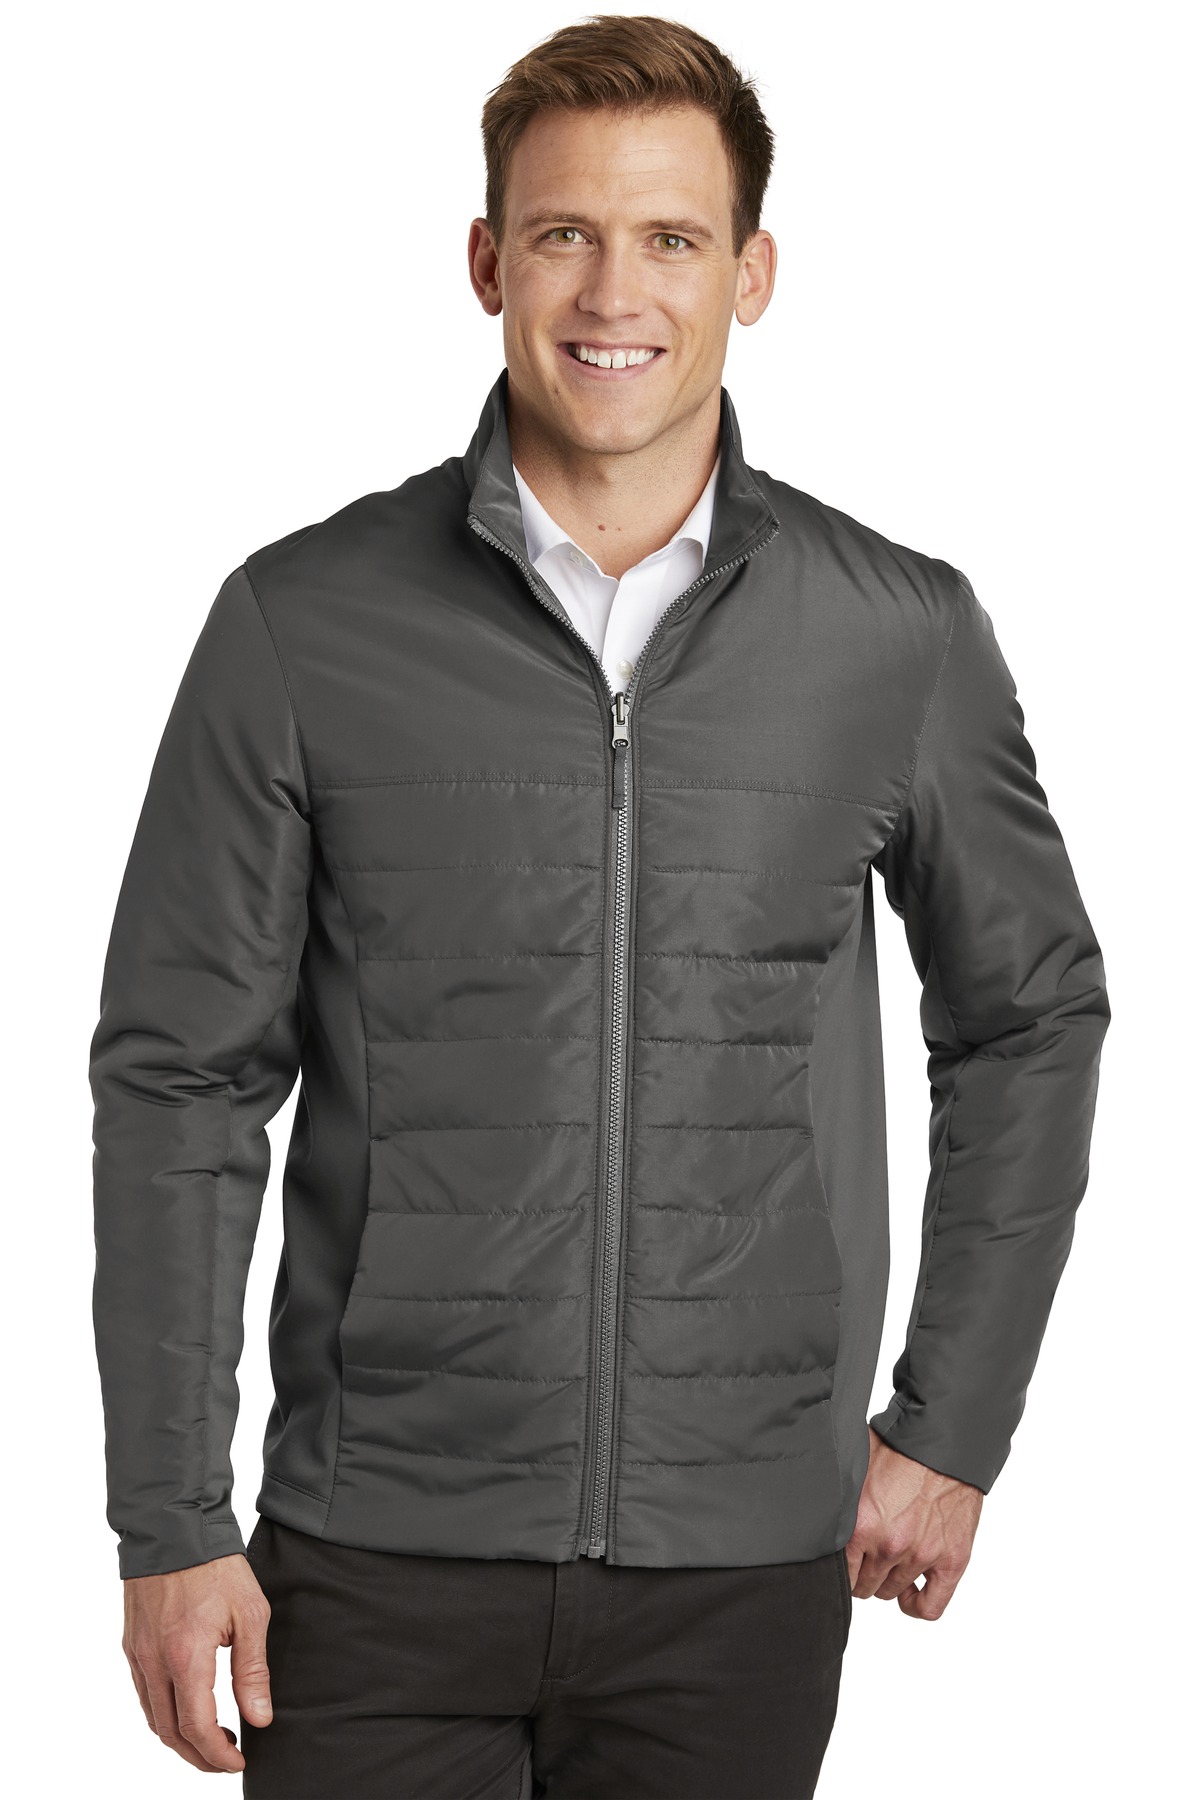 Port Authority Collective Insulated Jacket. J902